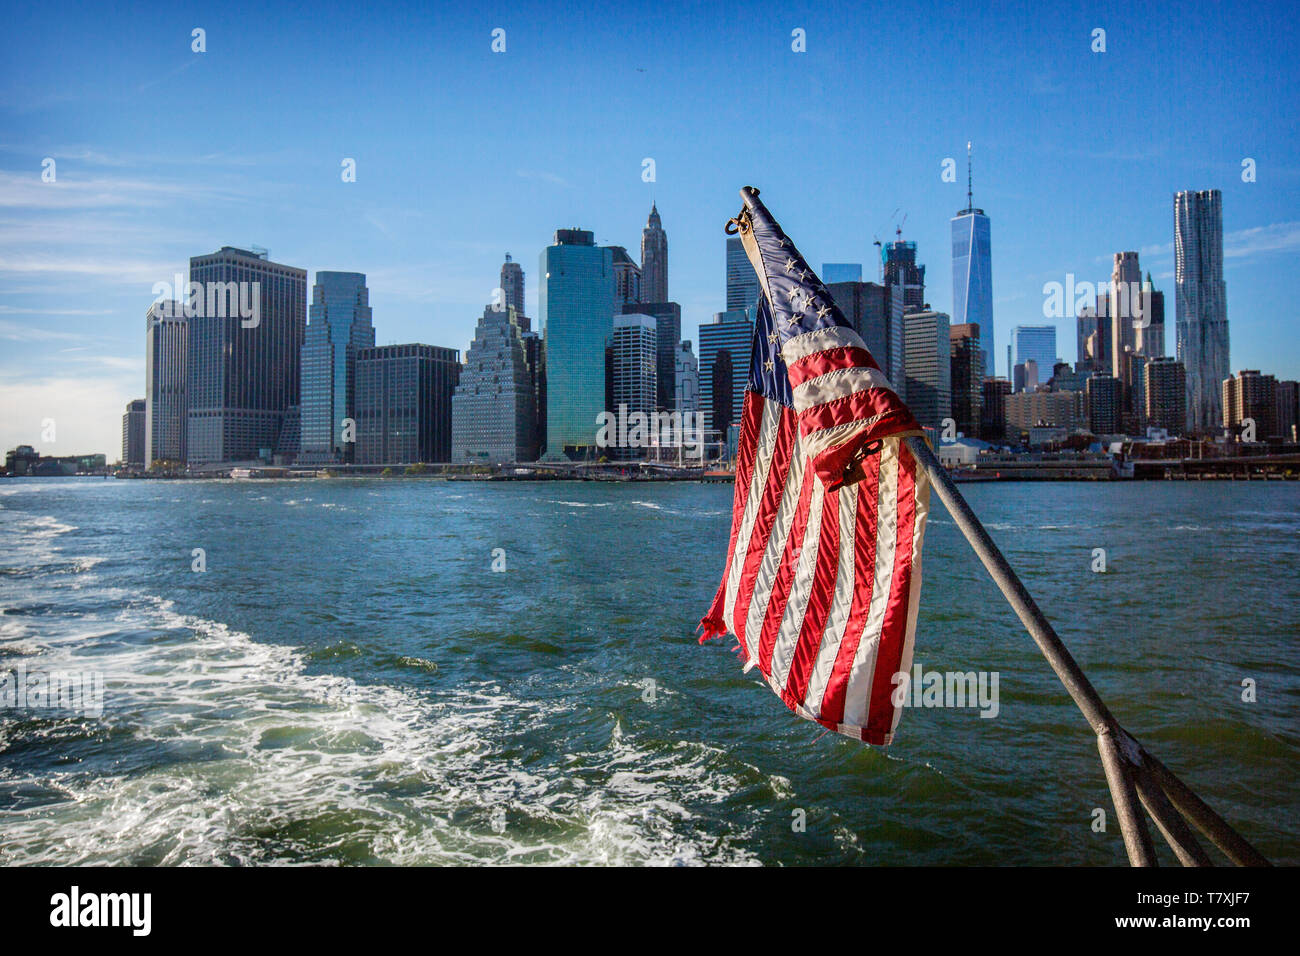 The Financial District part of the Manhattan Skyline as seen from the East River Ferry. Stock Photo